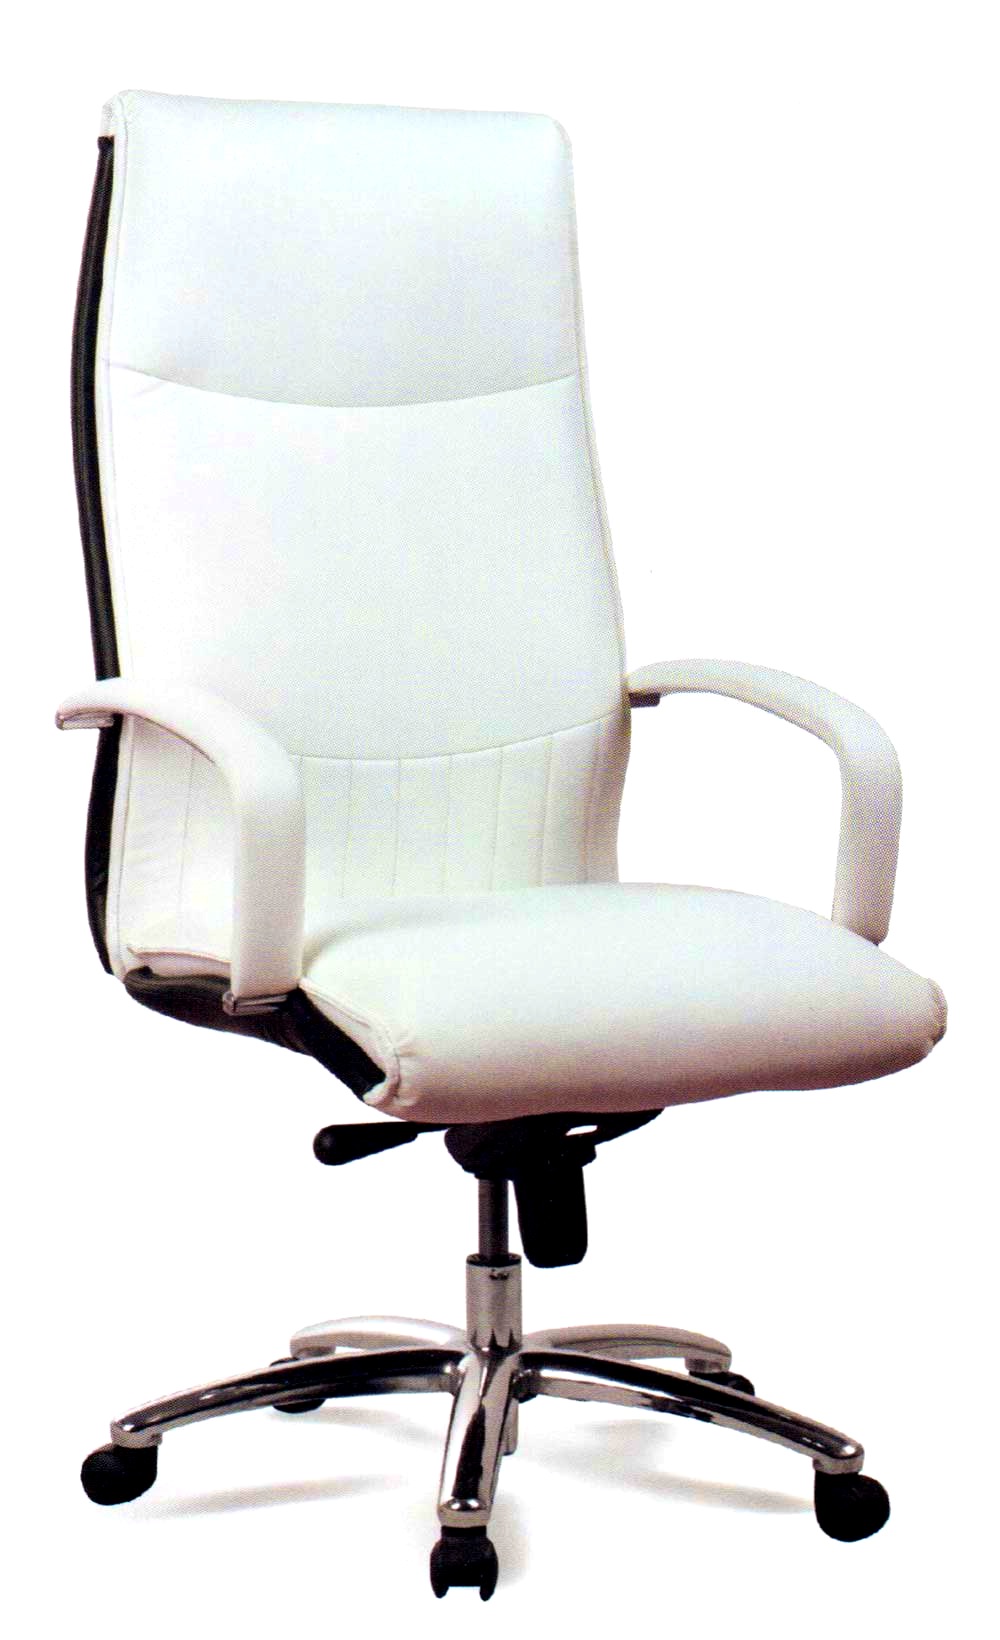 target desk chair target office chairs dazzling decor on target office chairs